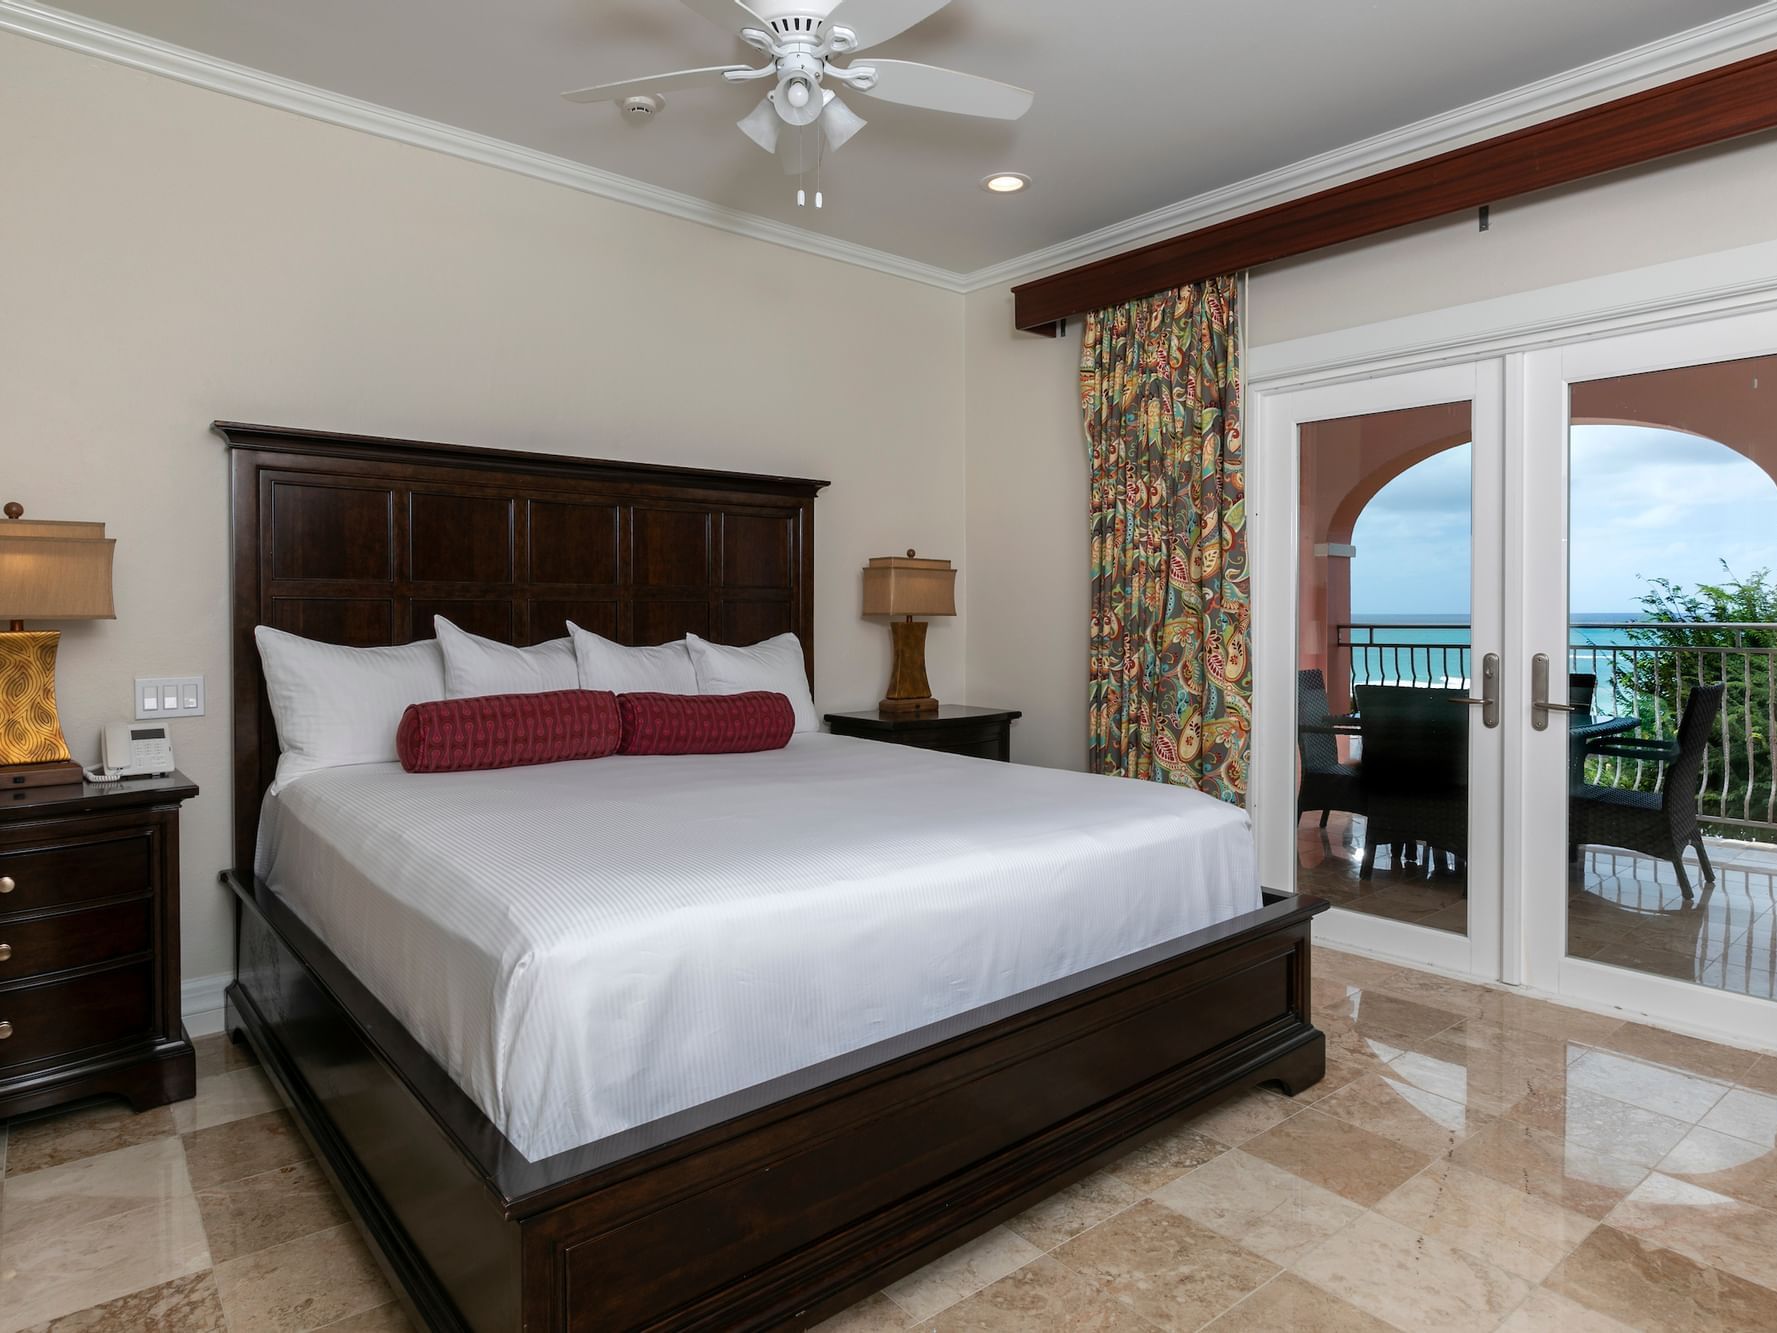 Bedroom & balcony area in Great House Suites at The Buccaneer